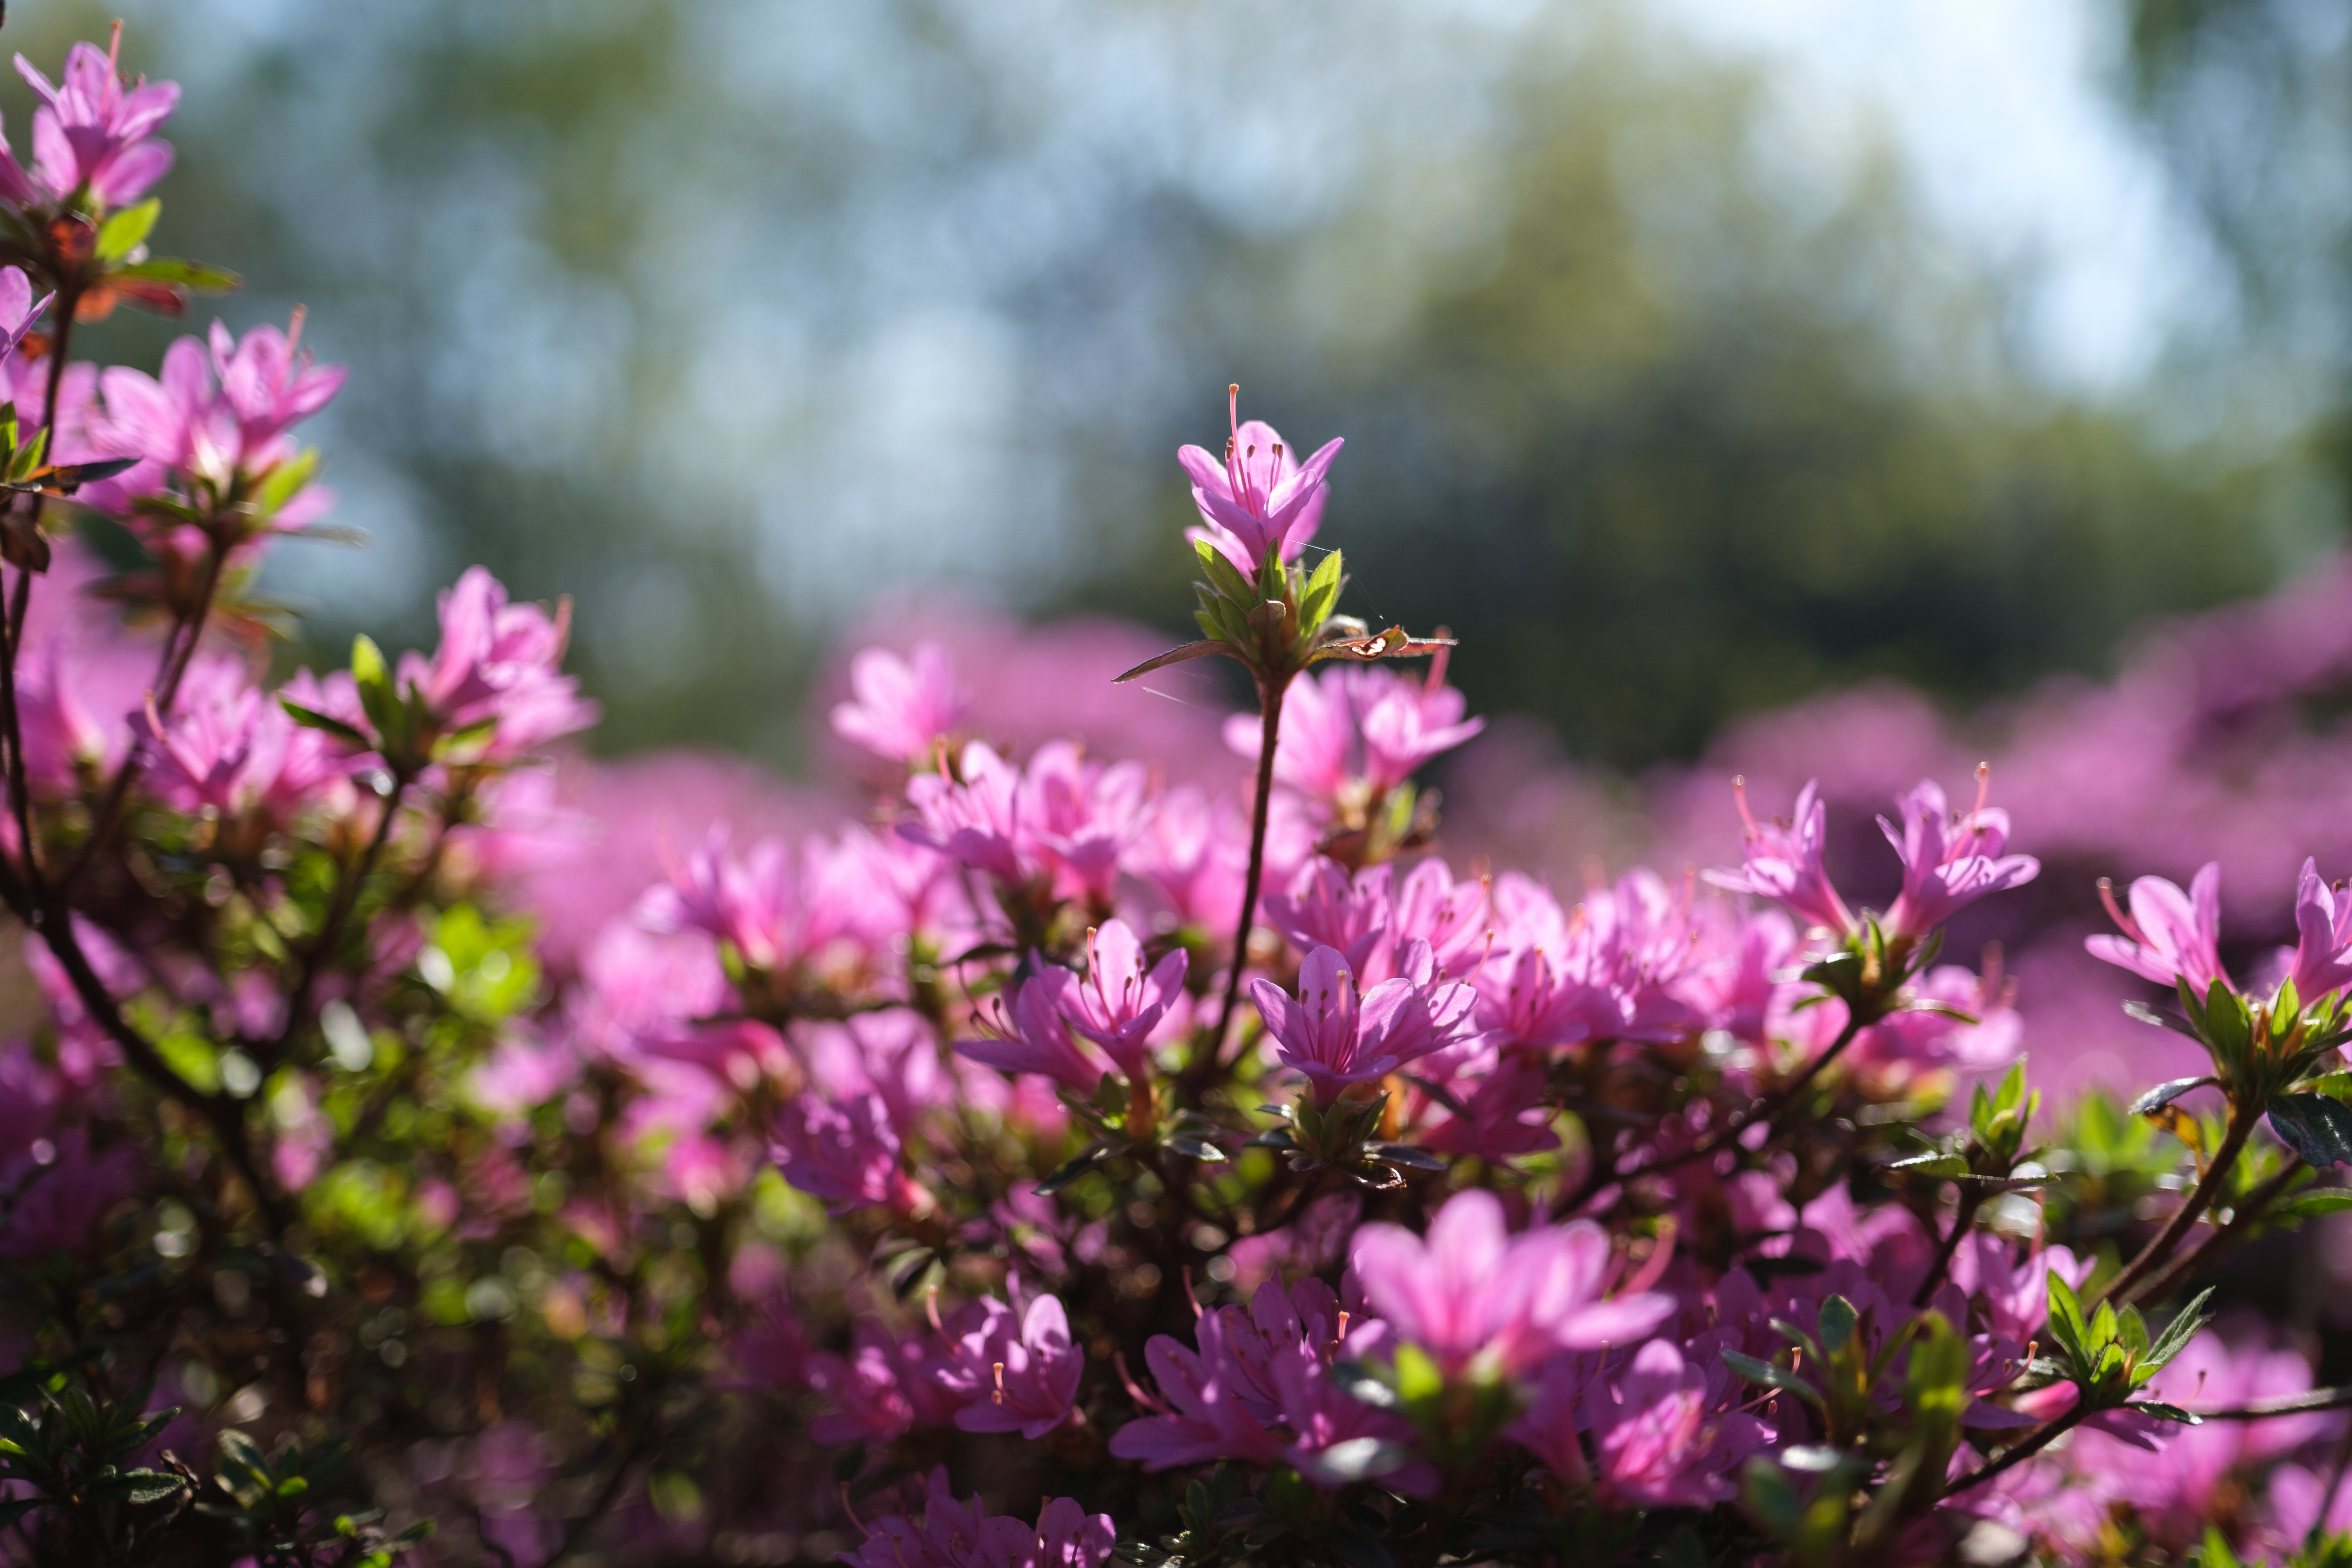 Pink flowers, 1/4000s, f/1.4, ISO160, 23mm